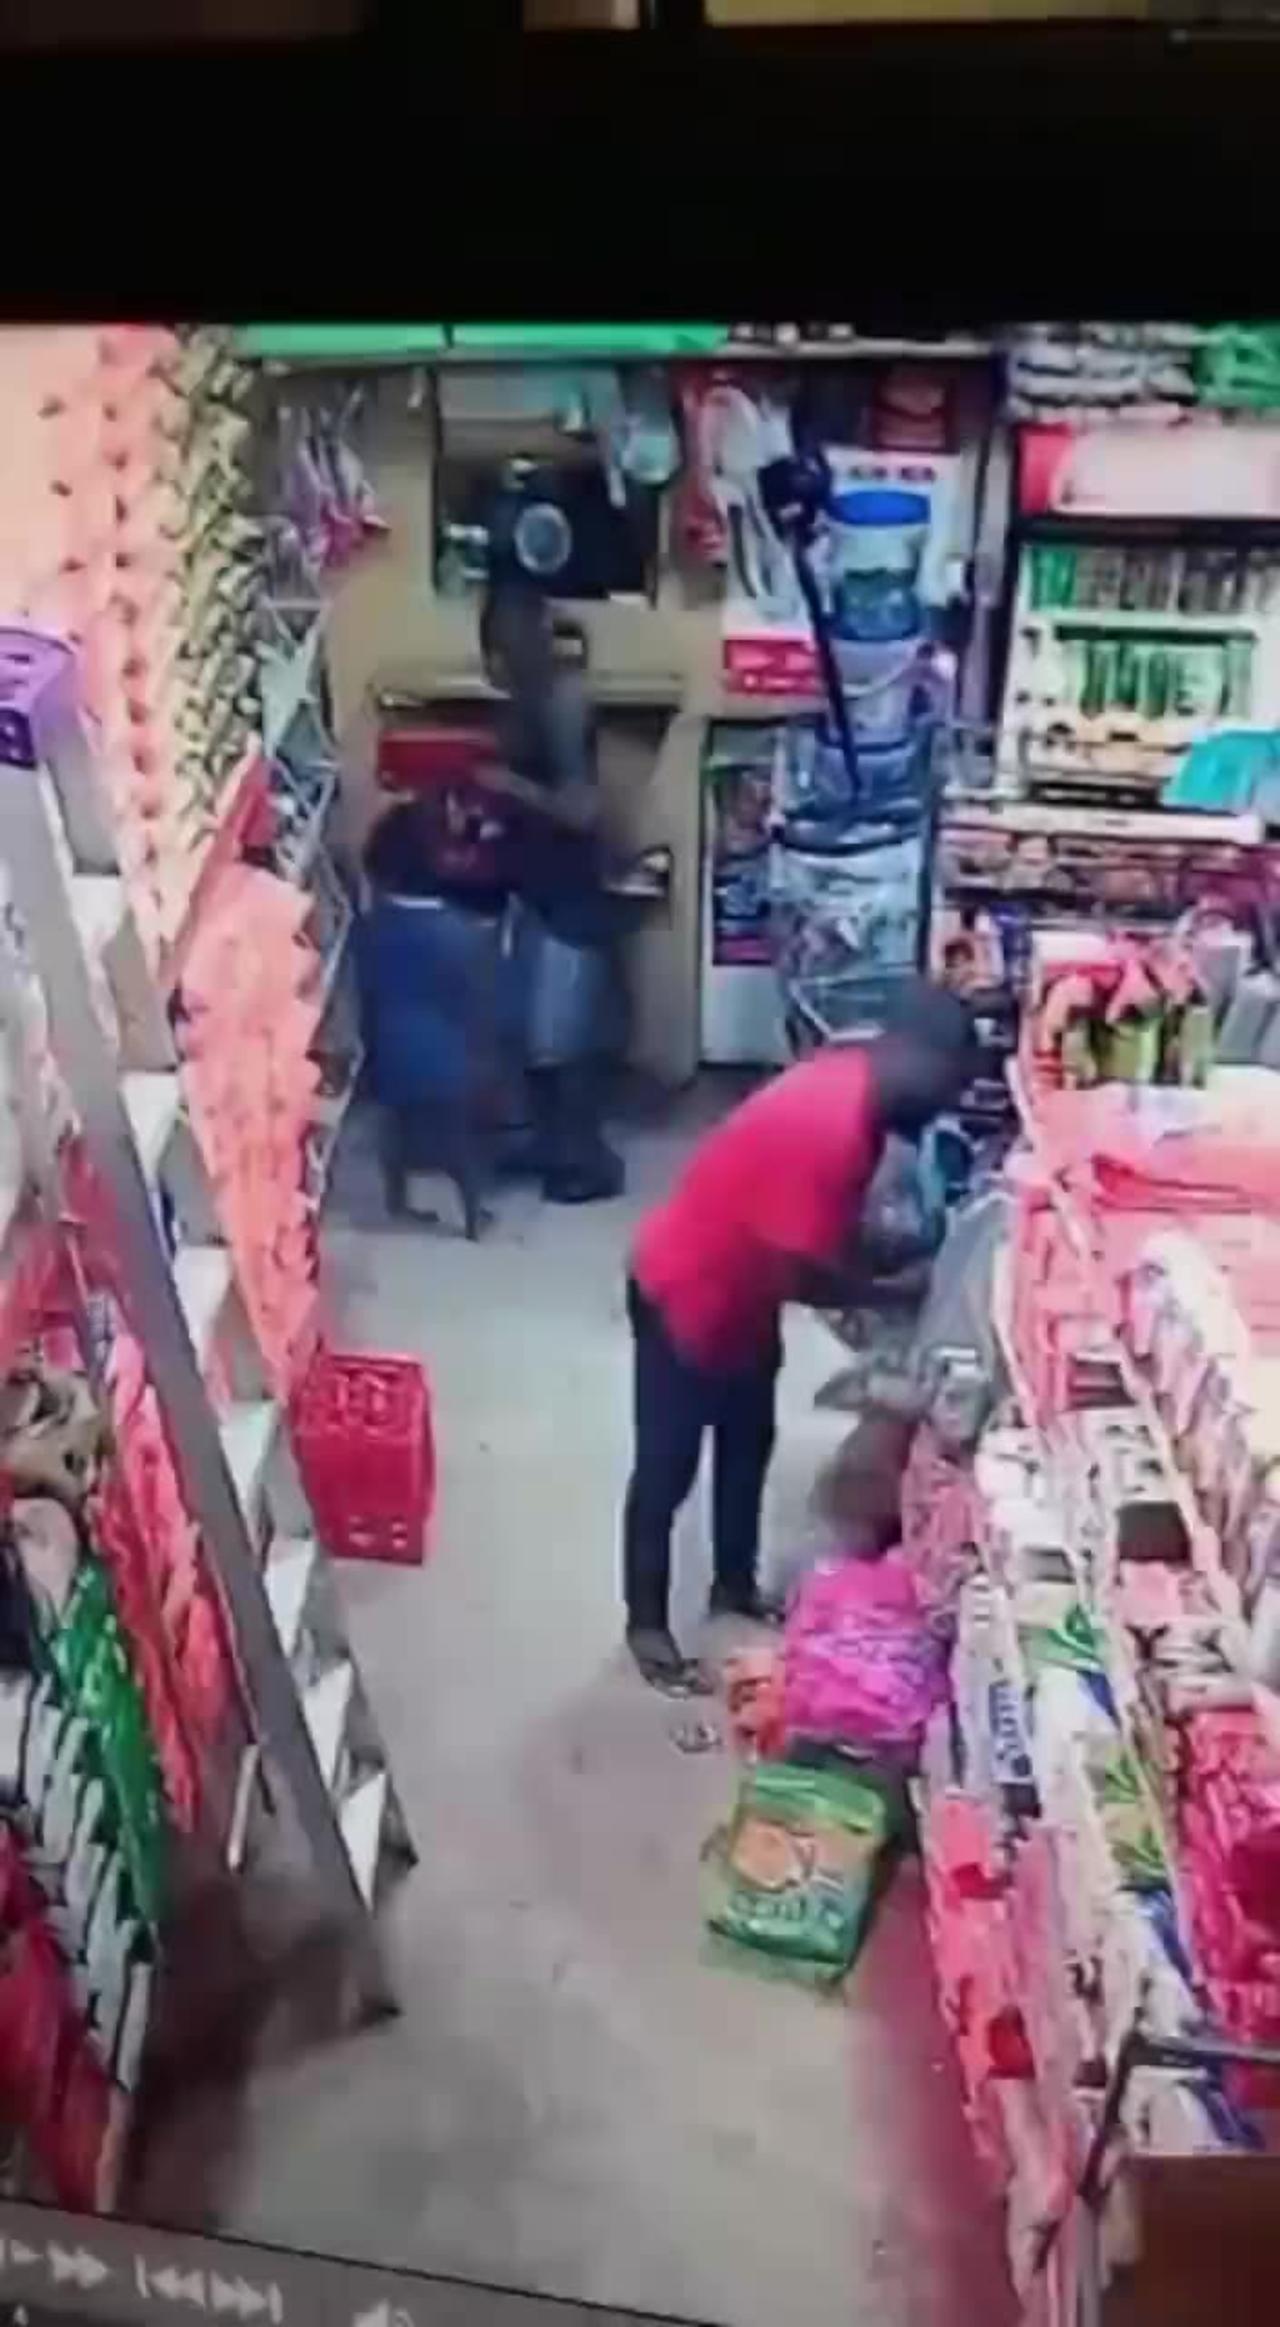 Man caught on shop’s CCTV camera with girl child he allegedly kidnapped